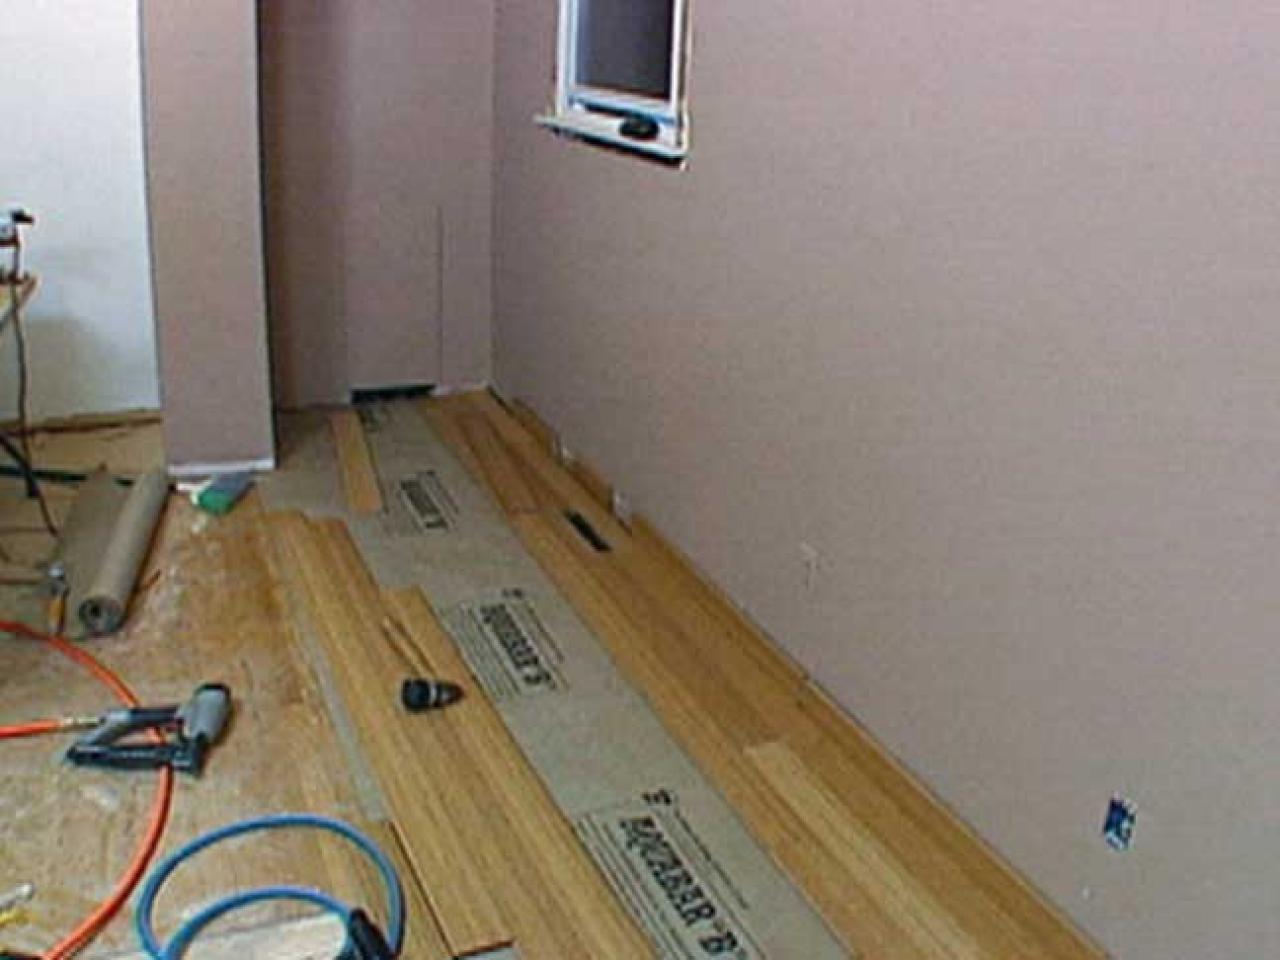 How To Install Bamboo Flooring, Does Bamboo Flooring Need Underlayment